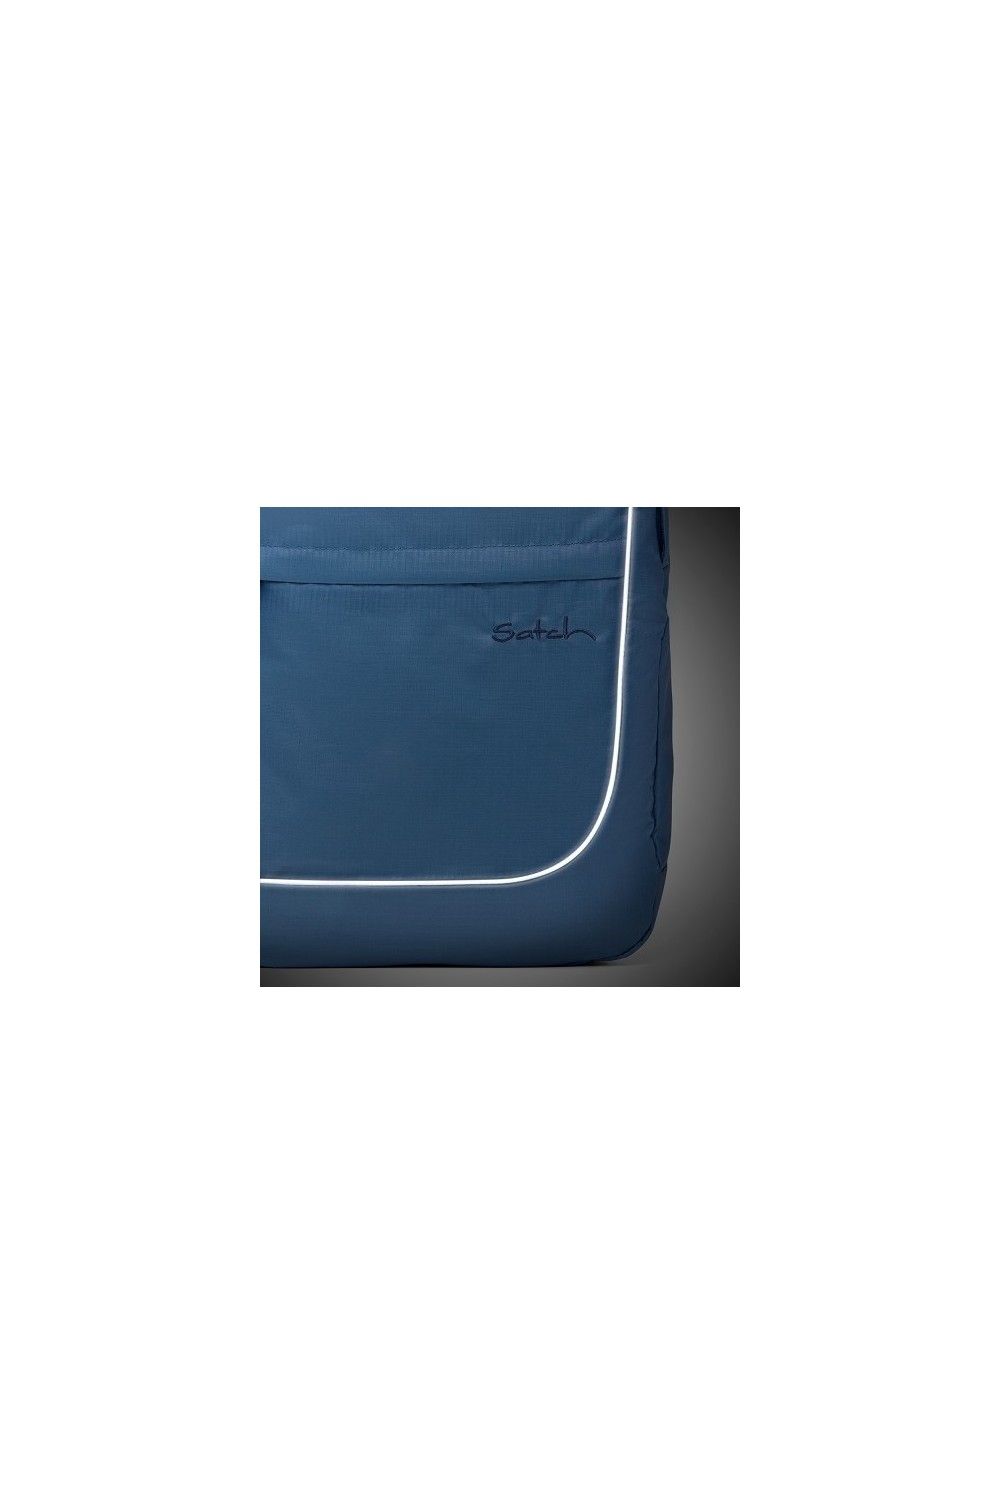 Sac à dos scolaire Satch Fly Ripstop Blue